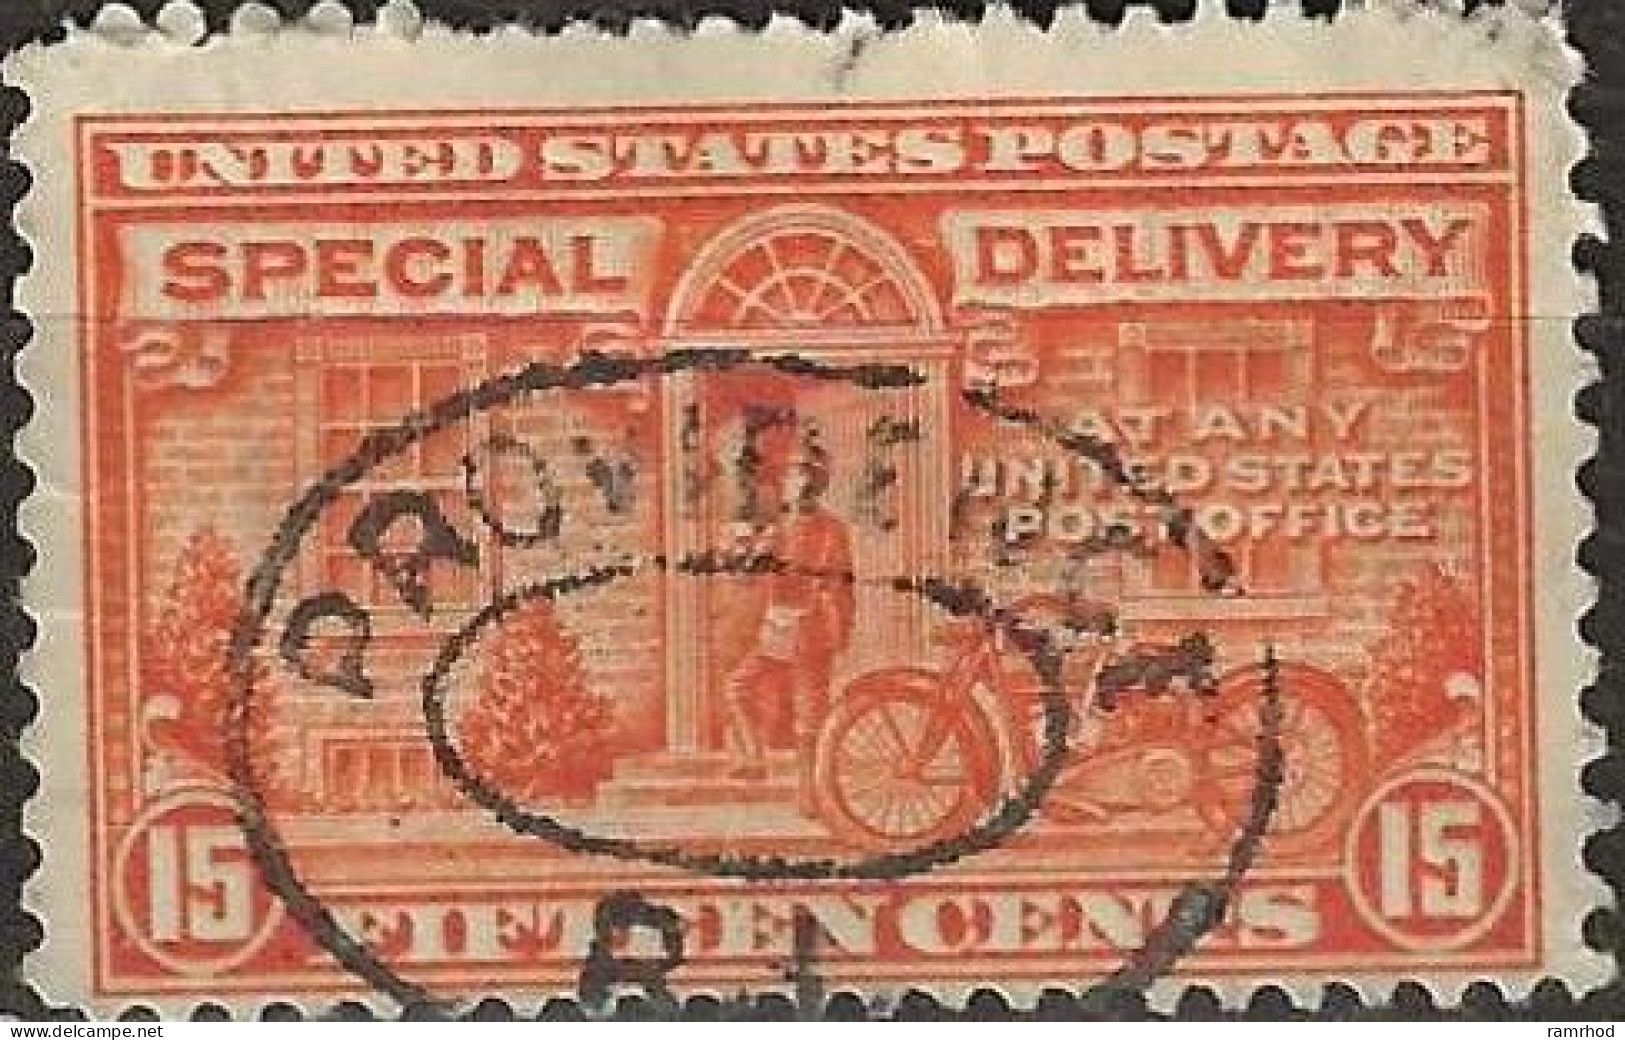 USA 1931 Special Delivery Stamps - 15c - Delivery By Motorcycle FU - Special Delivery, Registration & Certified